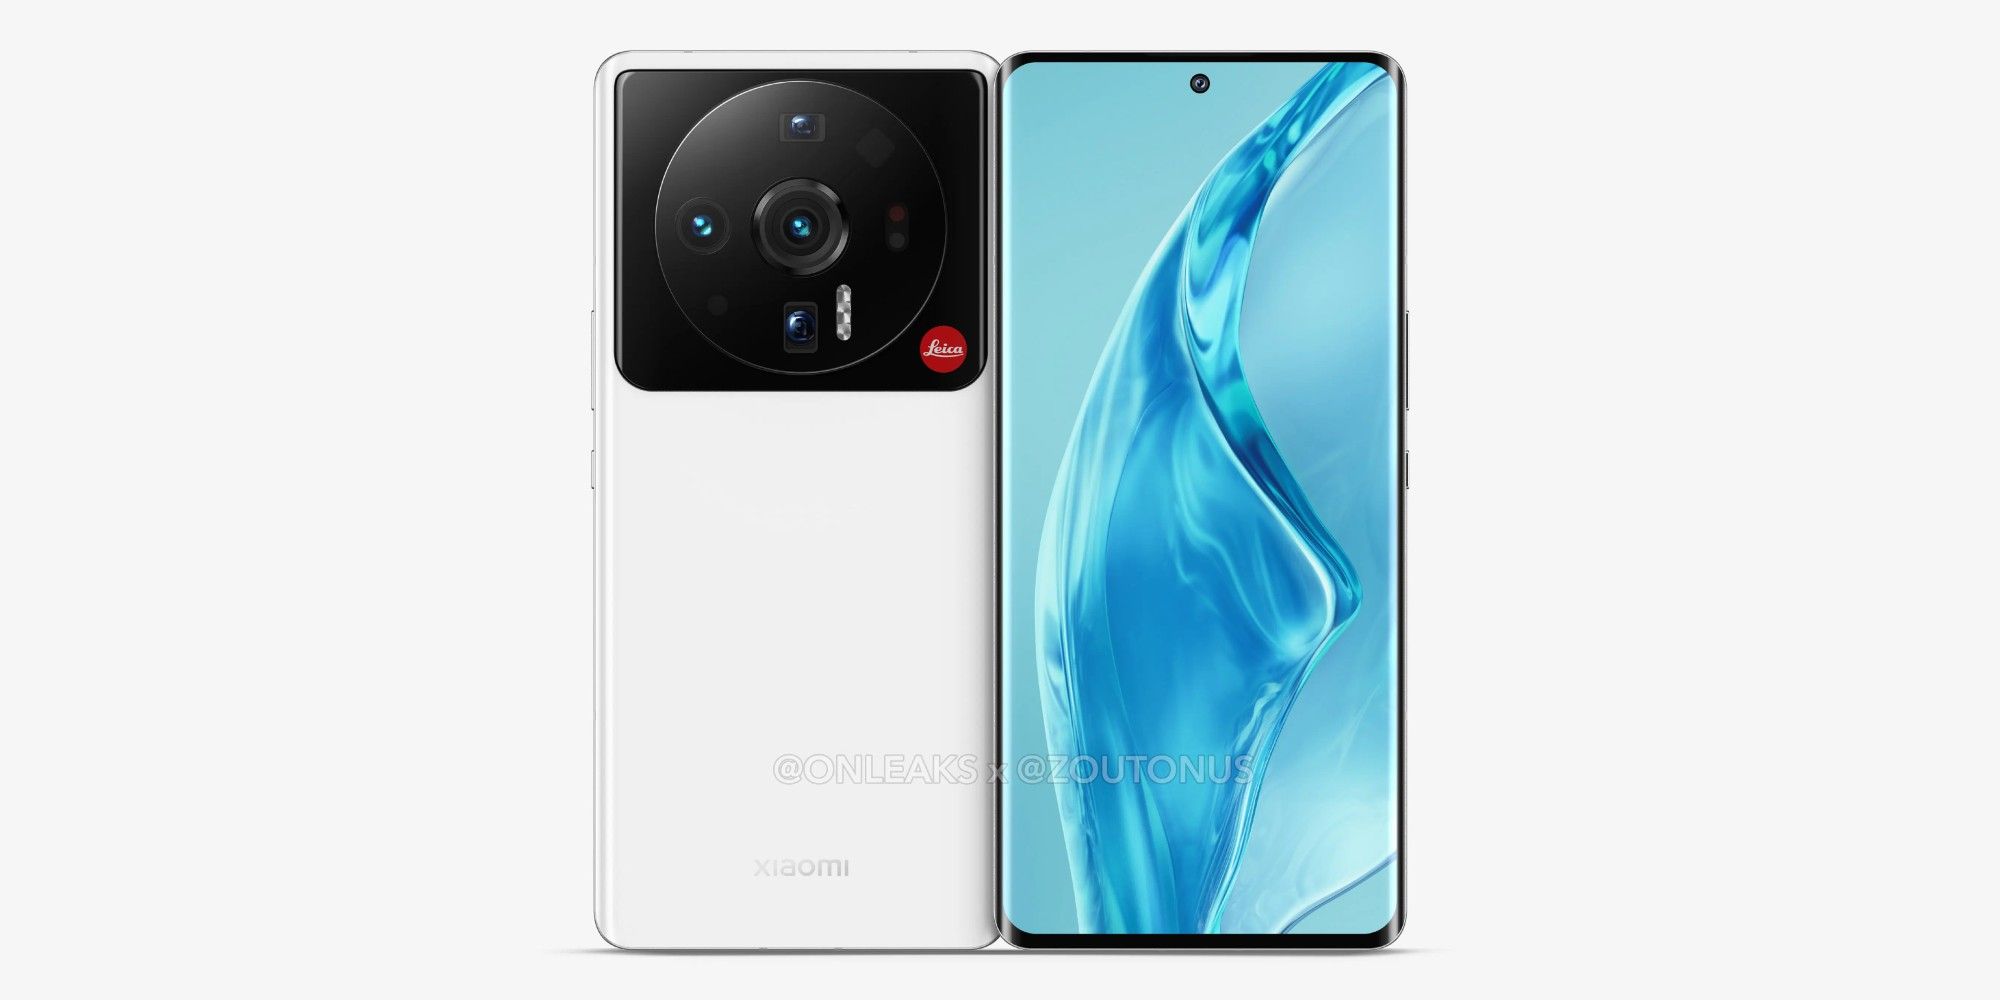 Xiaomi 12 Ultra is shown with a quad-camera array